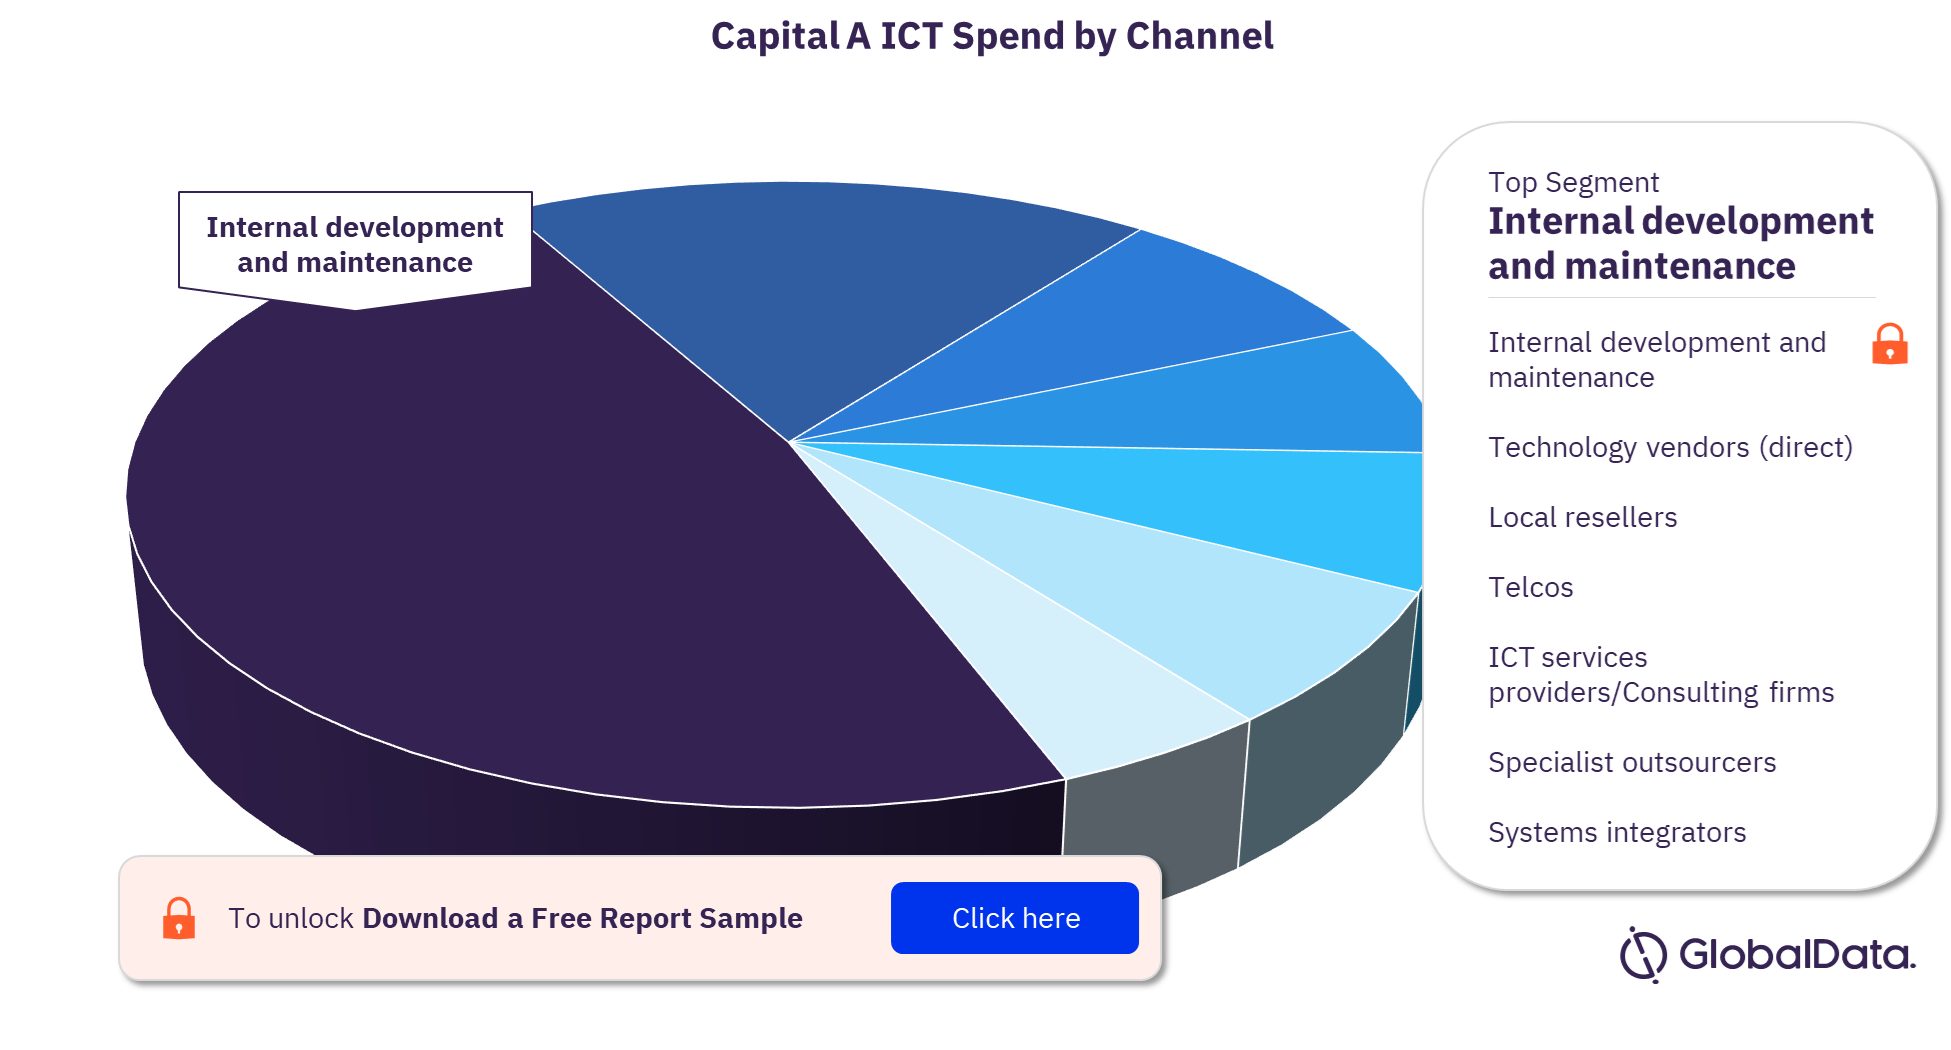 Capital A ICT Spend by Channel 